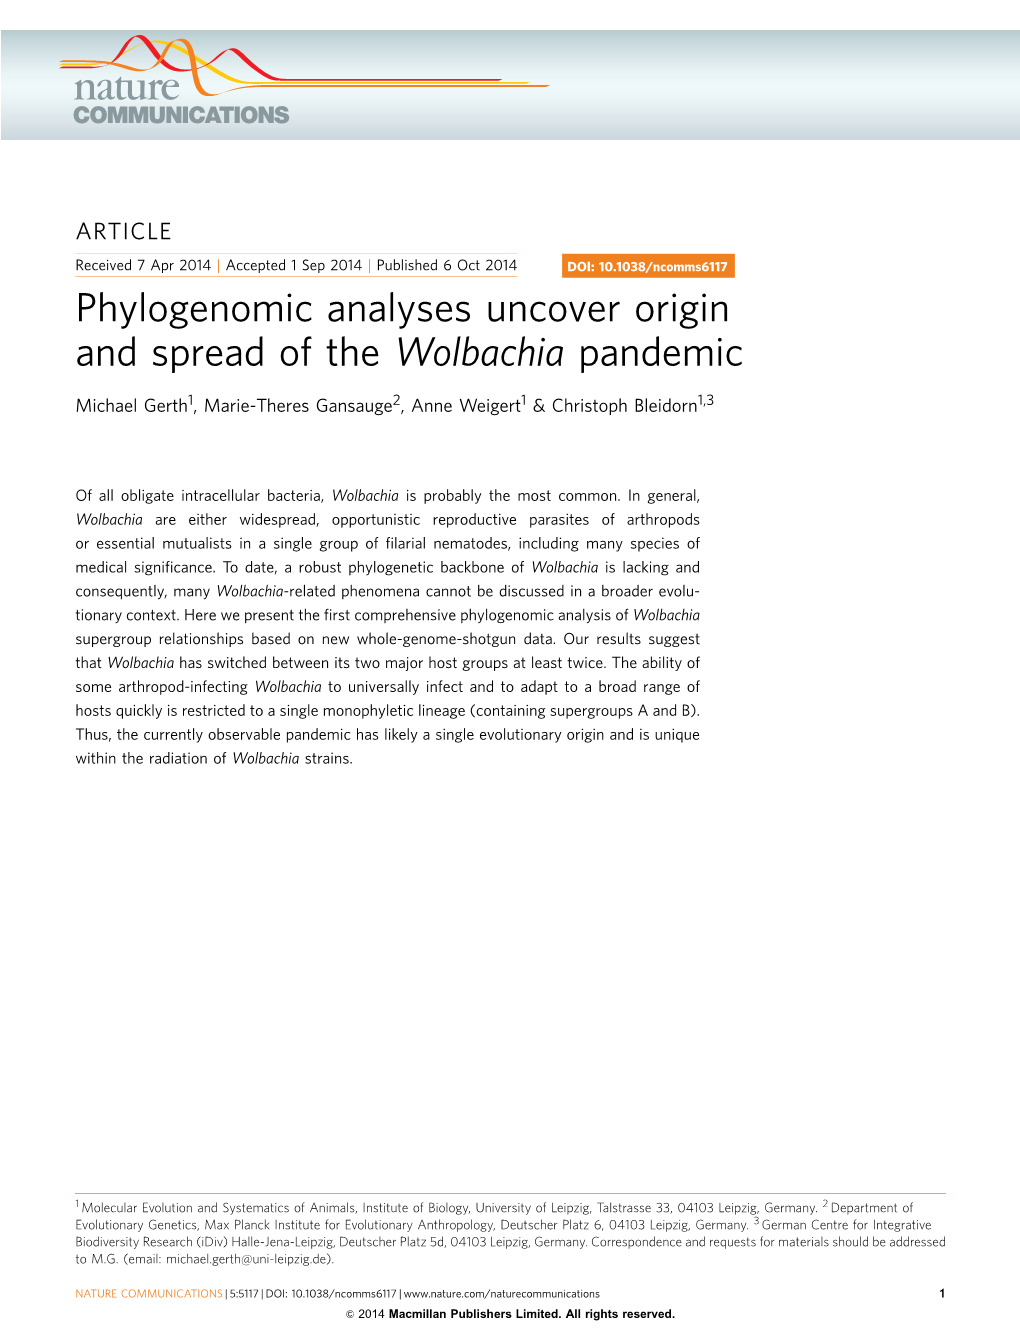 Phylogenomic Analyses Uncover Origin and Spread of the Wolbachia Pandemic